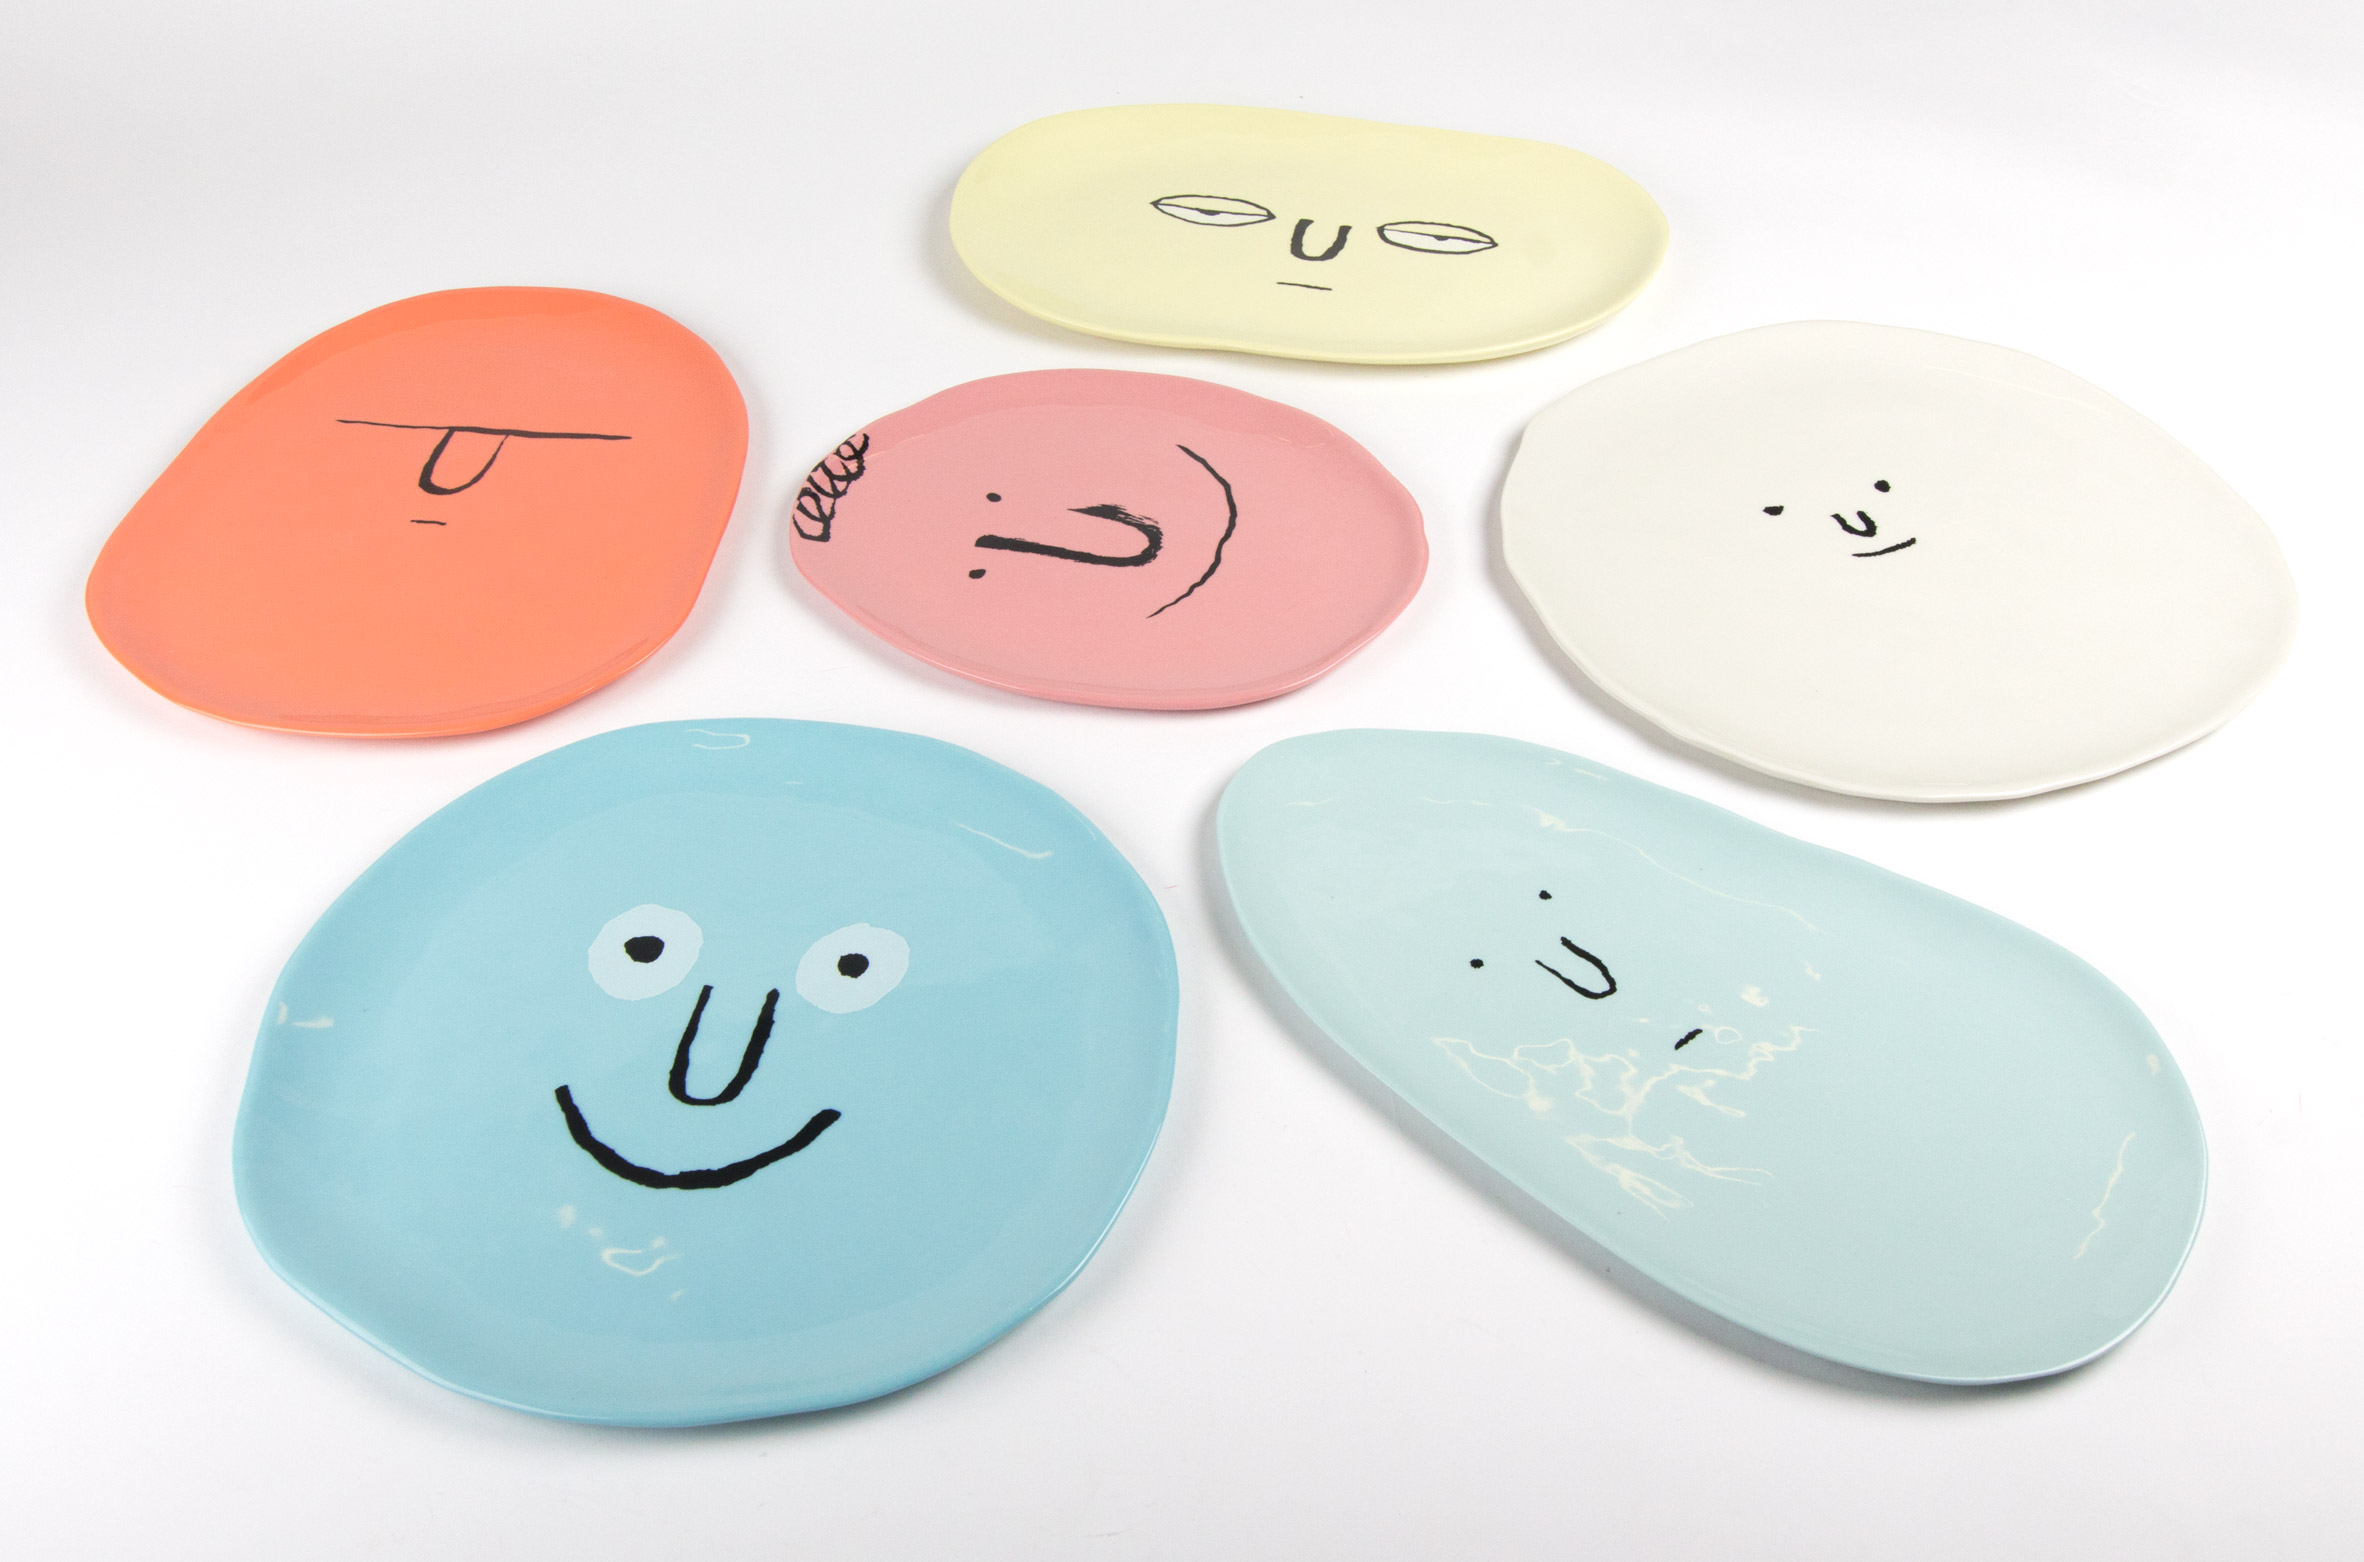 Jean Jullien turns faces into plates for Case Studyo